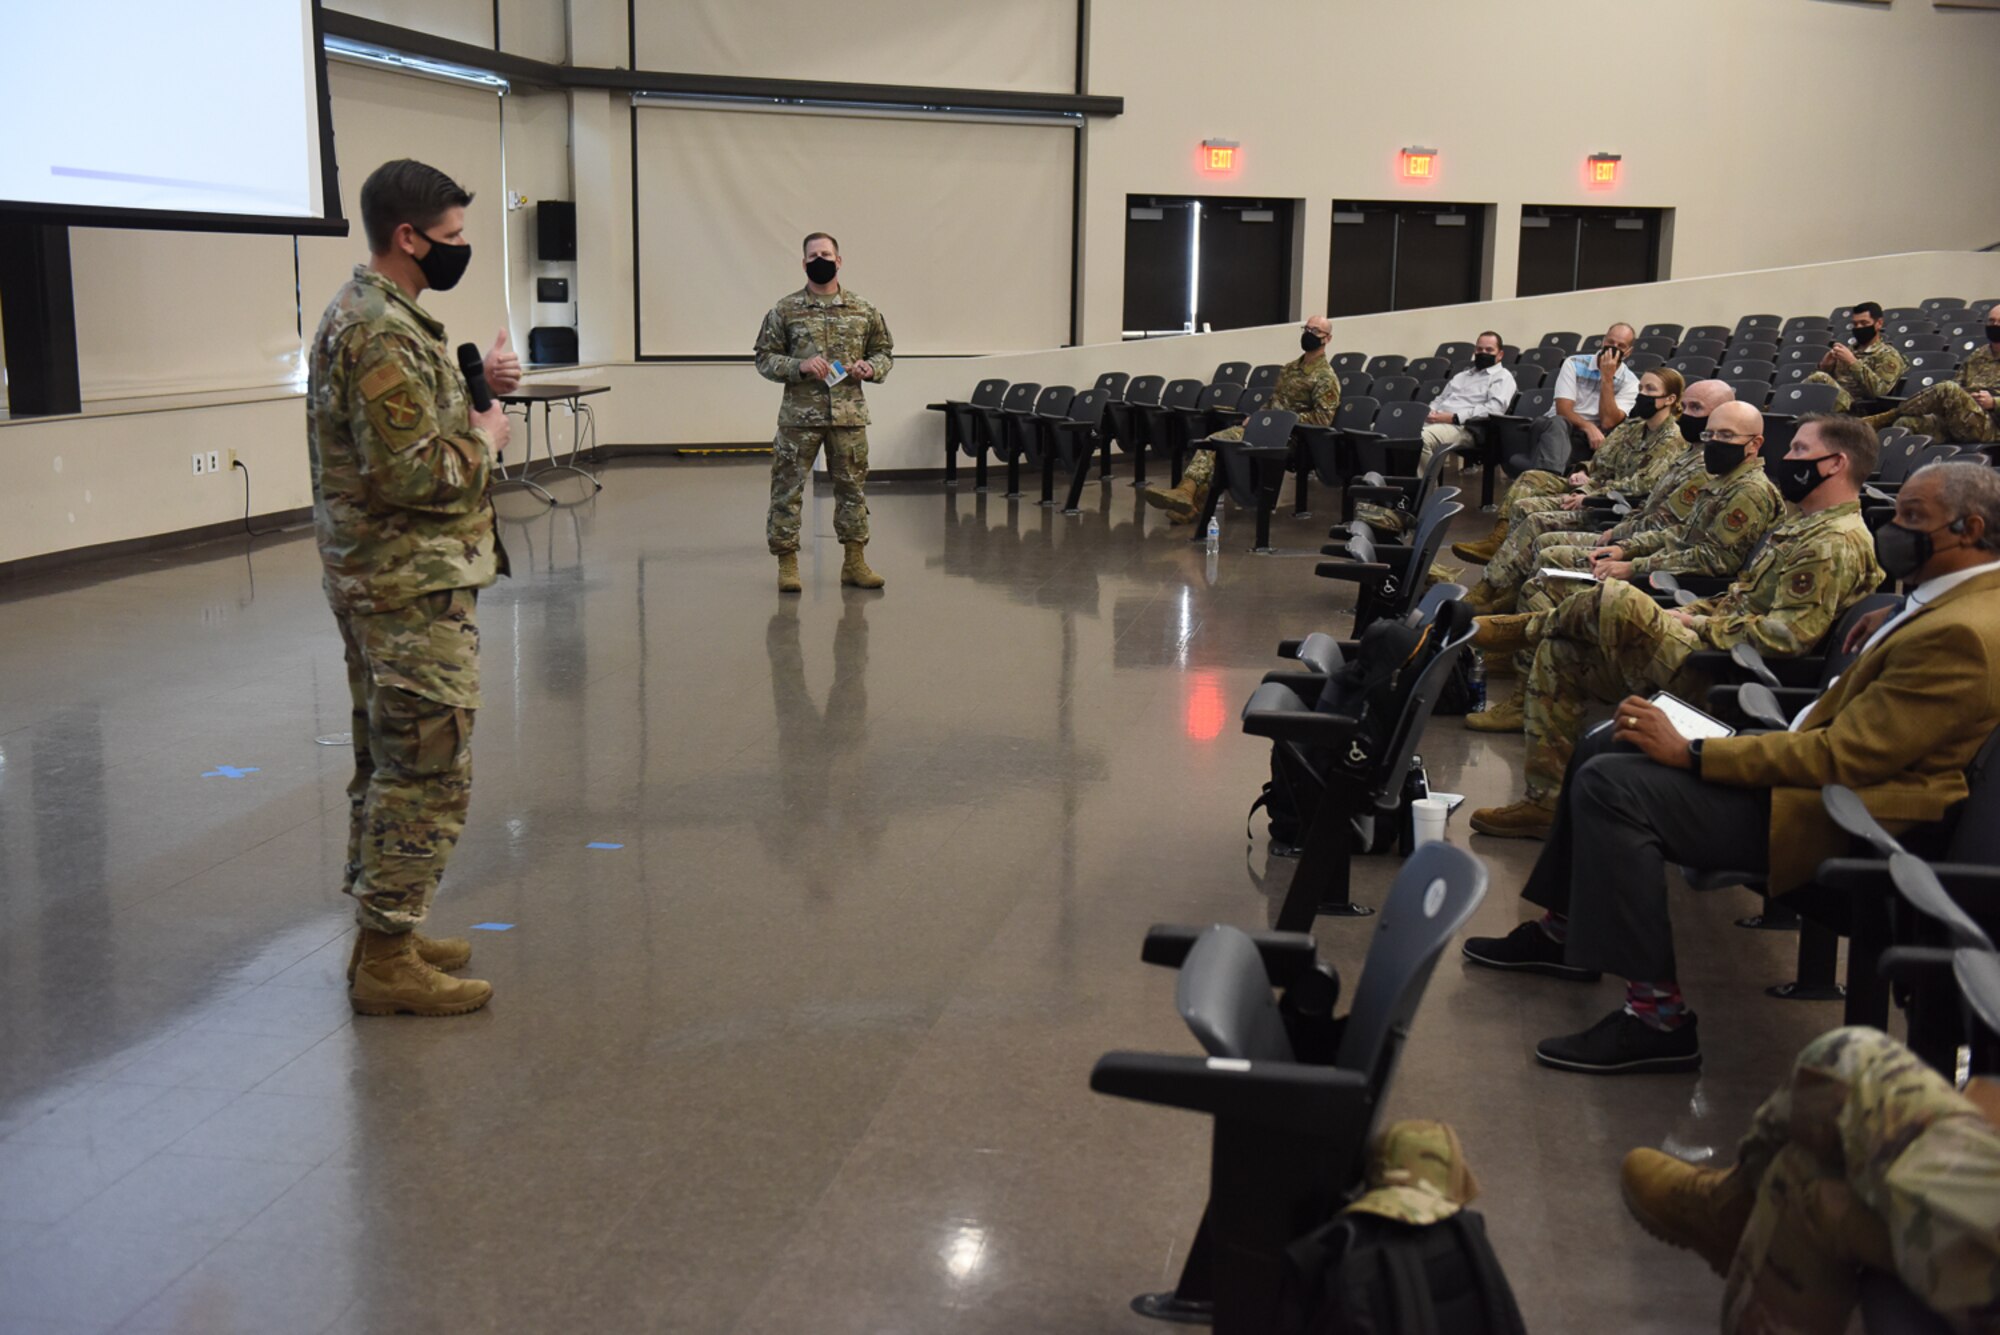 37th TRW commander addresses conference attendees